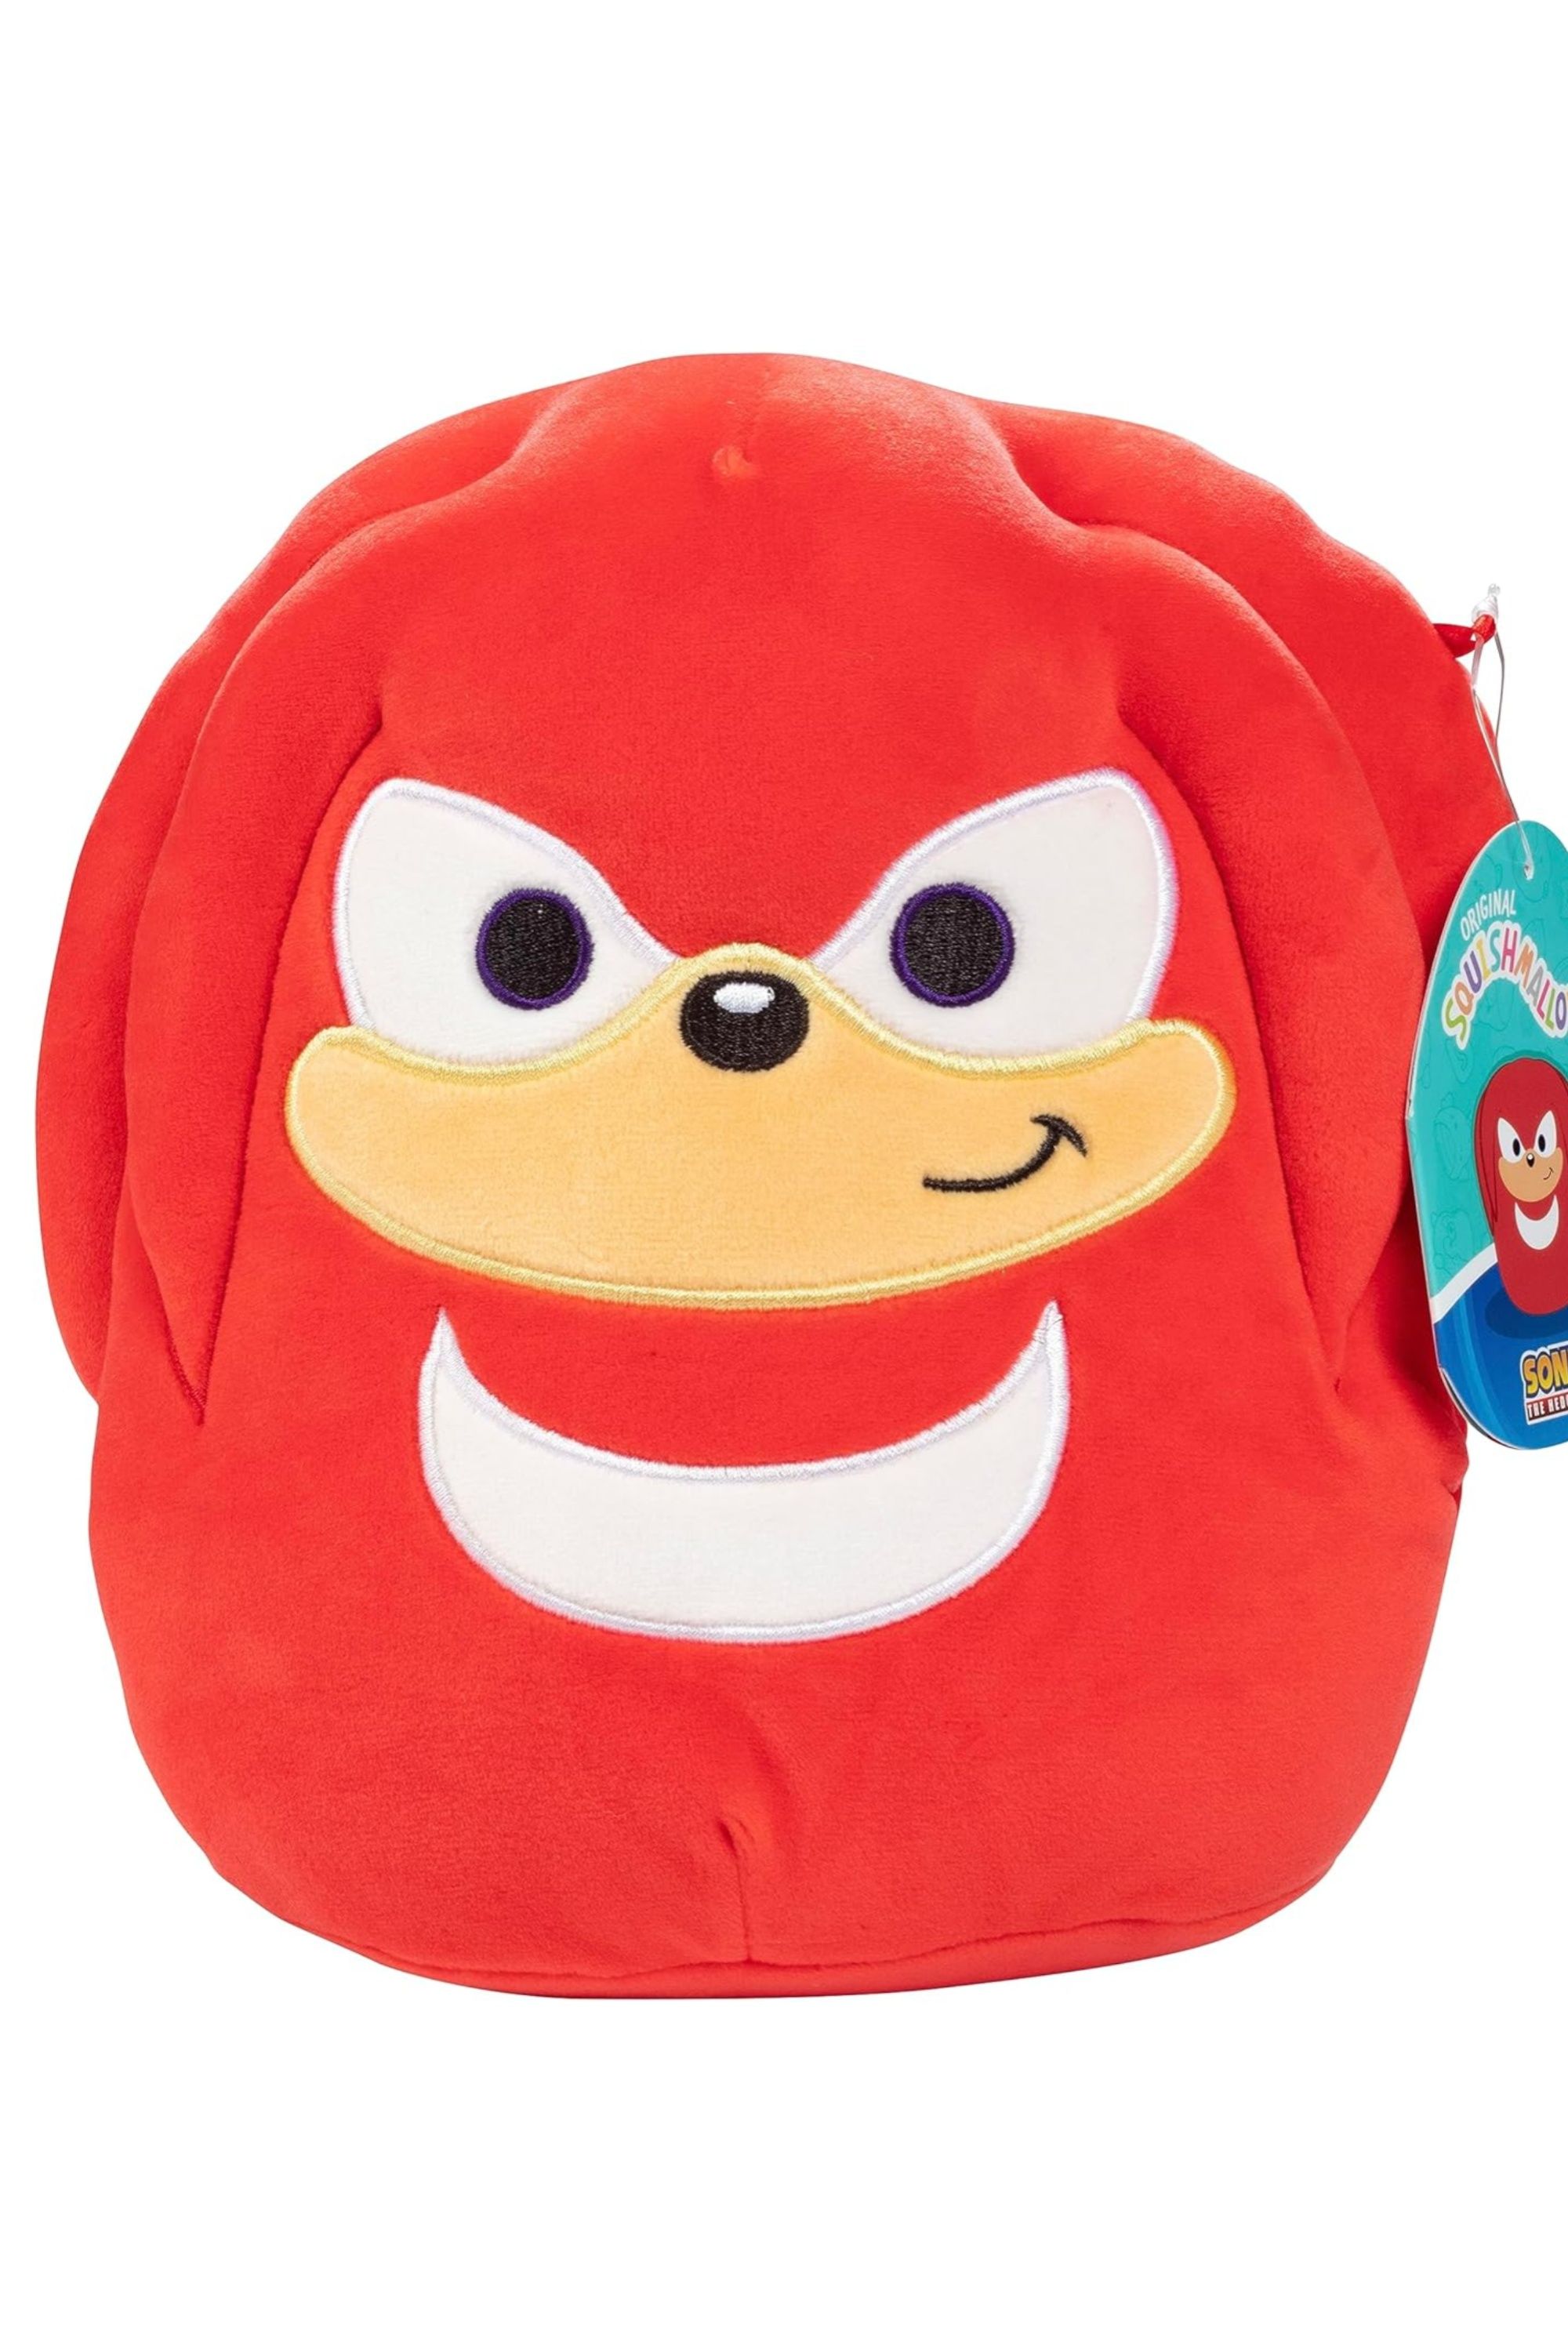 Knuckles Squishmallow